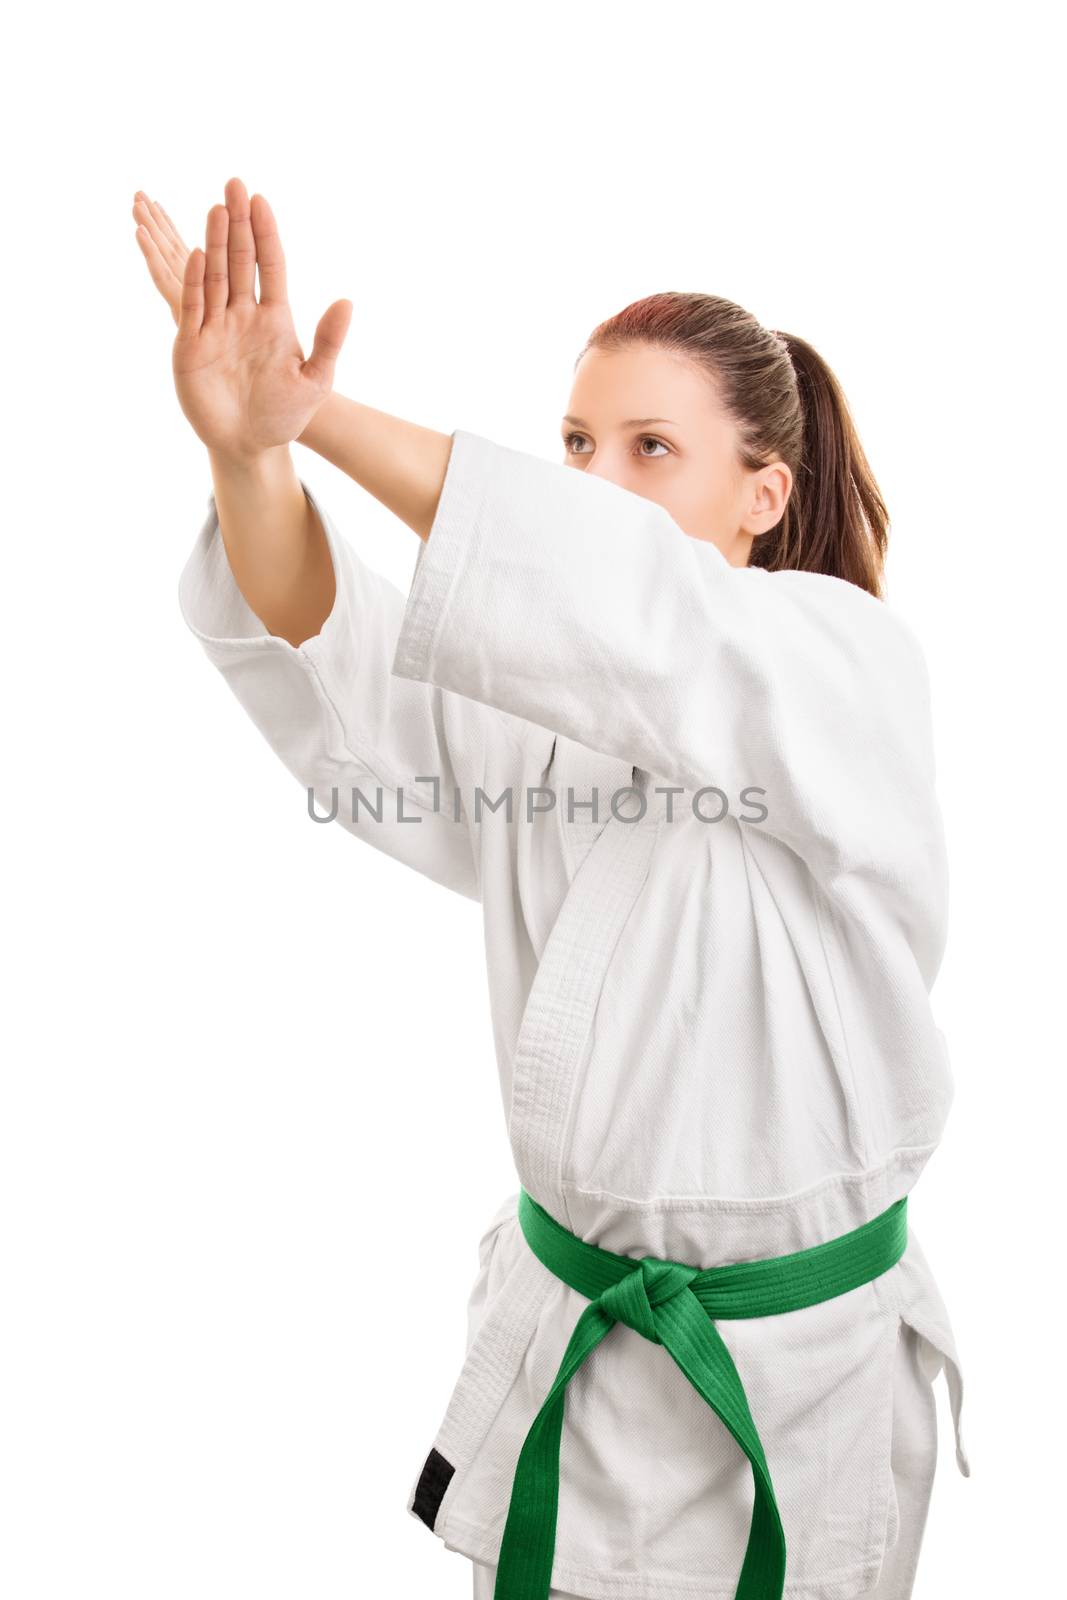 Block this way. Young girl wearing kimono with green belt in block stance, isolated on white background.